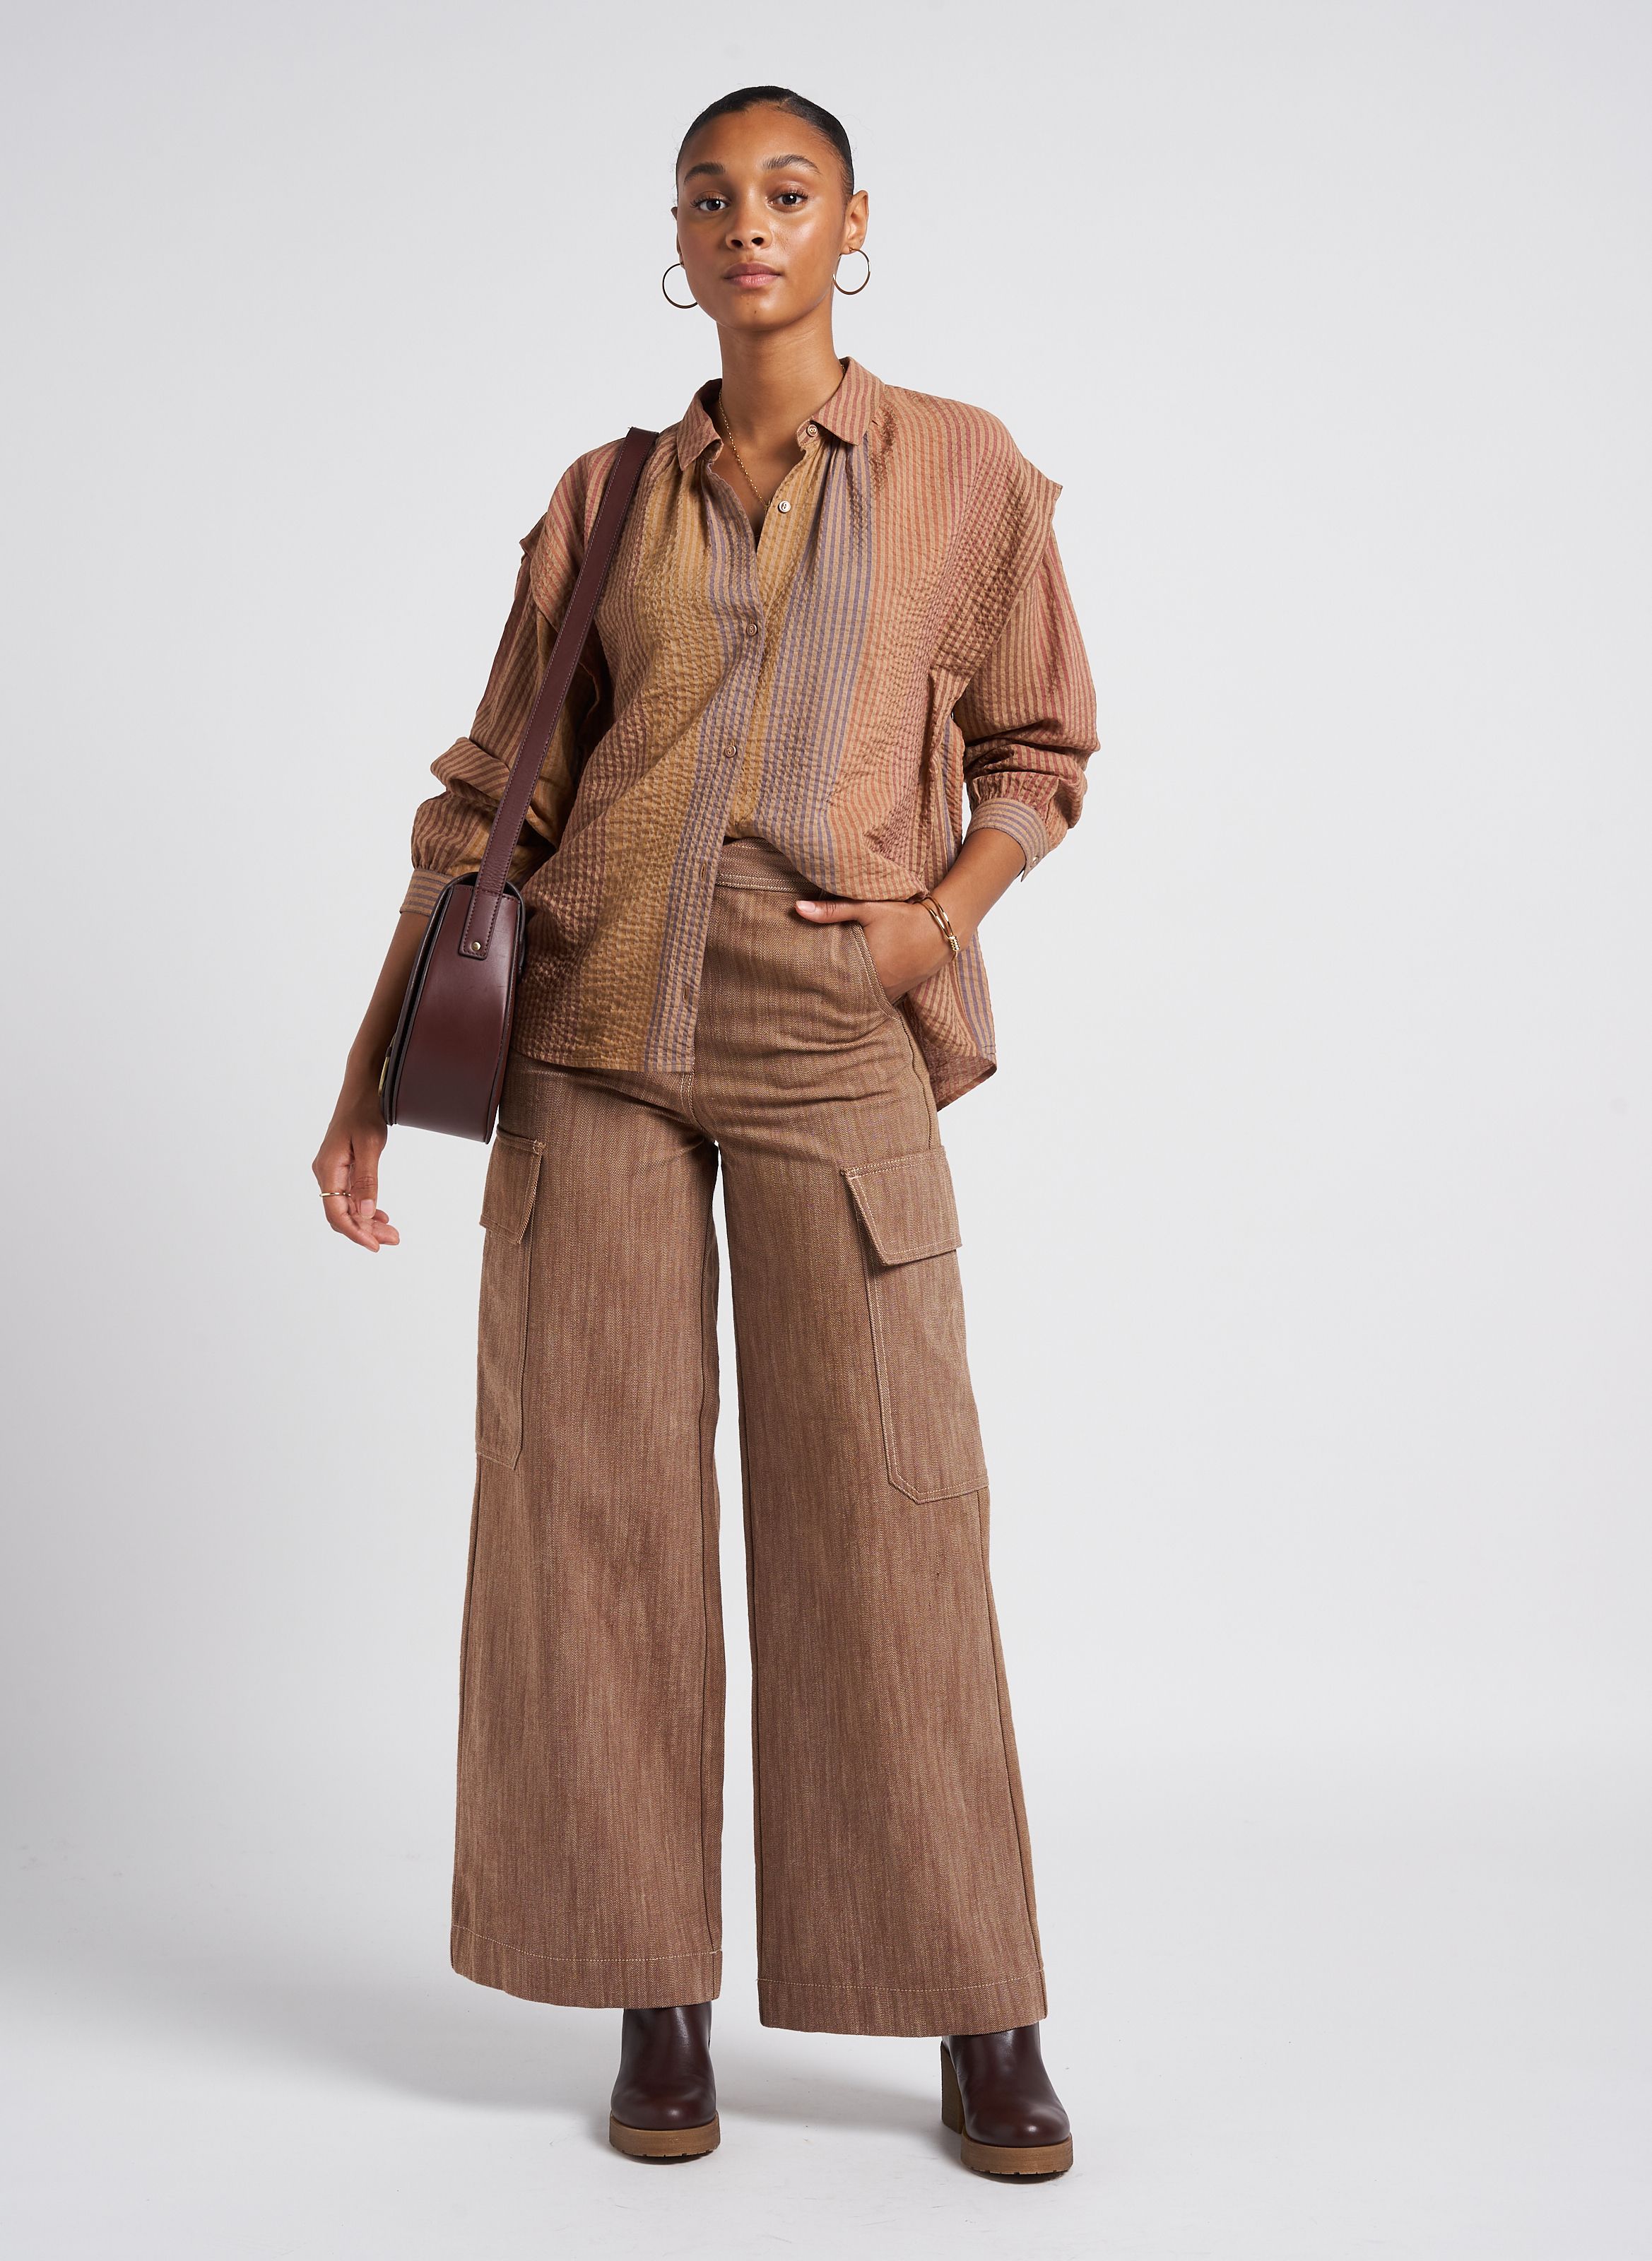 Mix Pleat | Women And Classic Sessun Detail Mocha Flat Place Loose-fitting Shirt With - Collar des Tendances